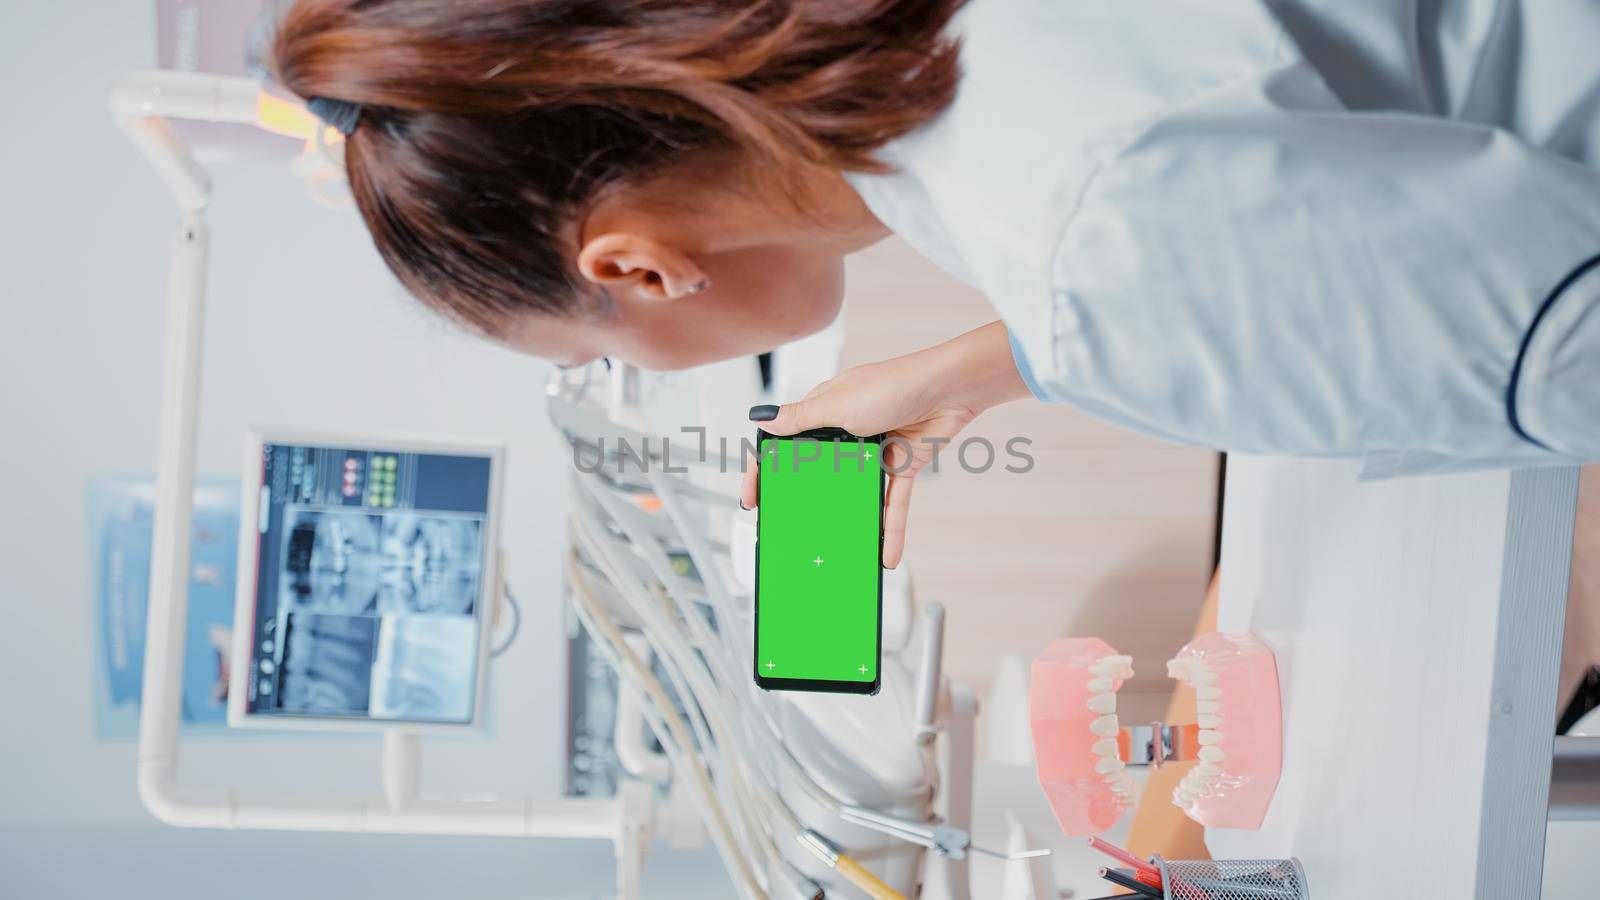 Vertical video: Specialist analyzing mobile phone with green screen by DCStudio